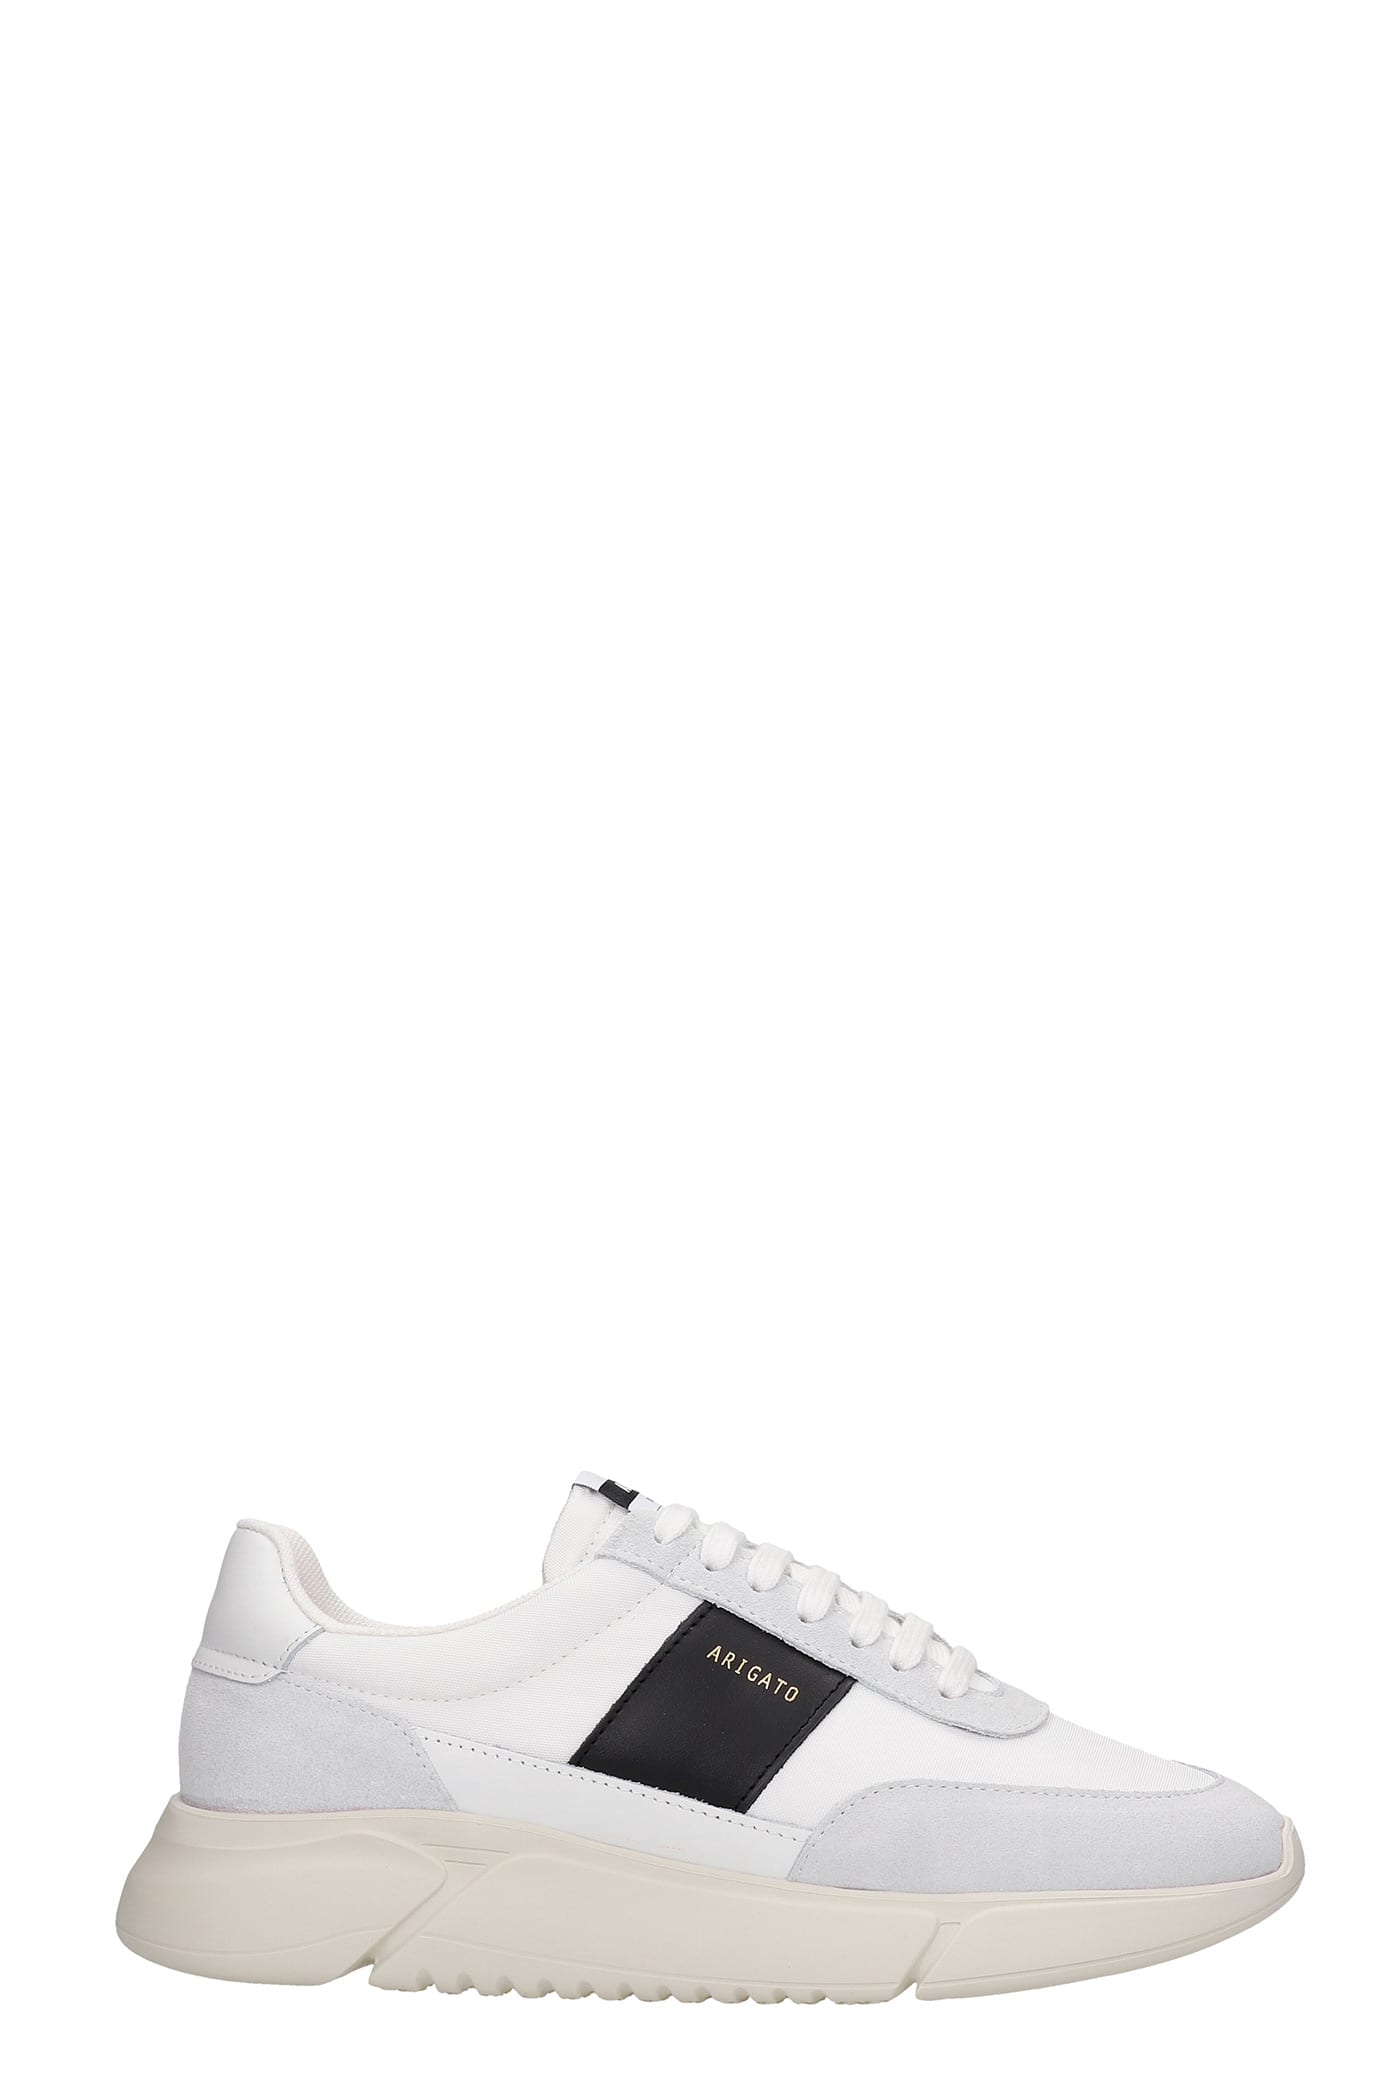 Axel Arigato Genesis Sneakers In White Suede And Leather